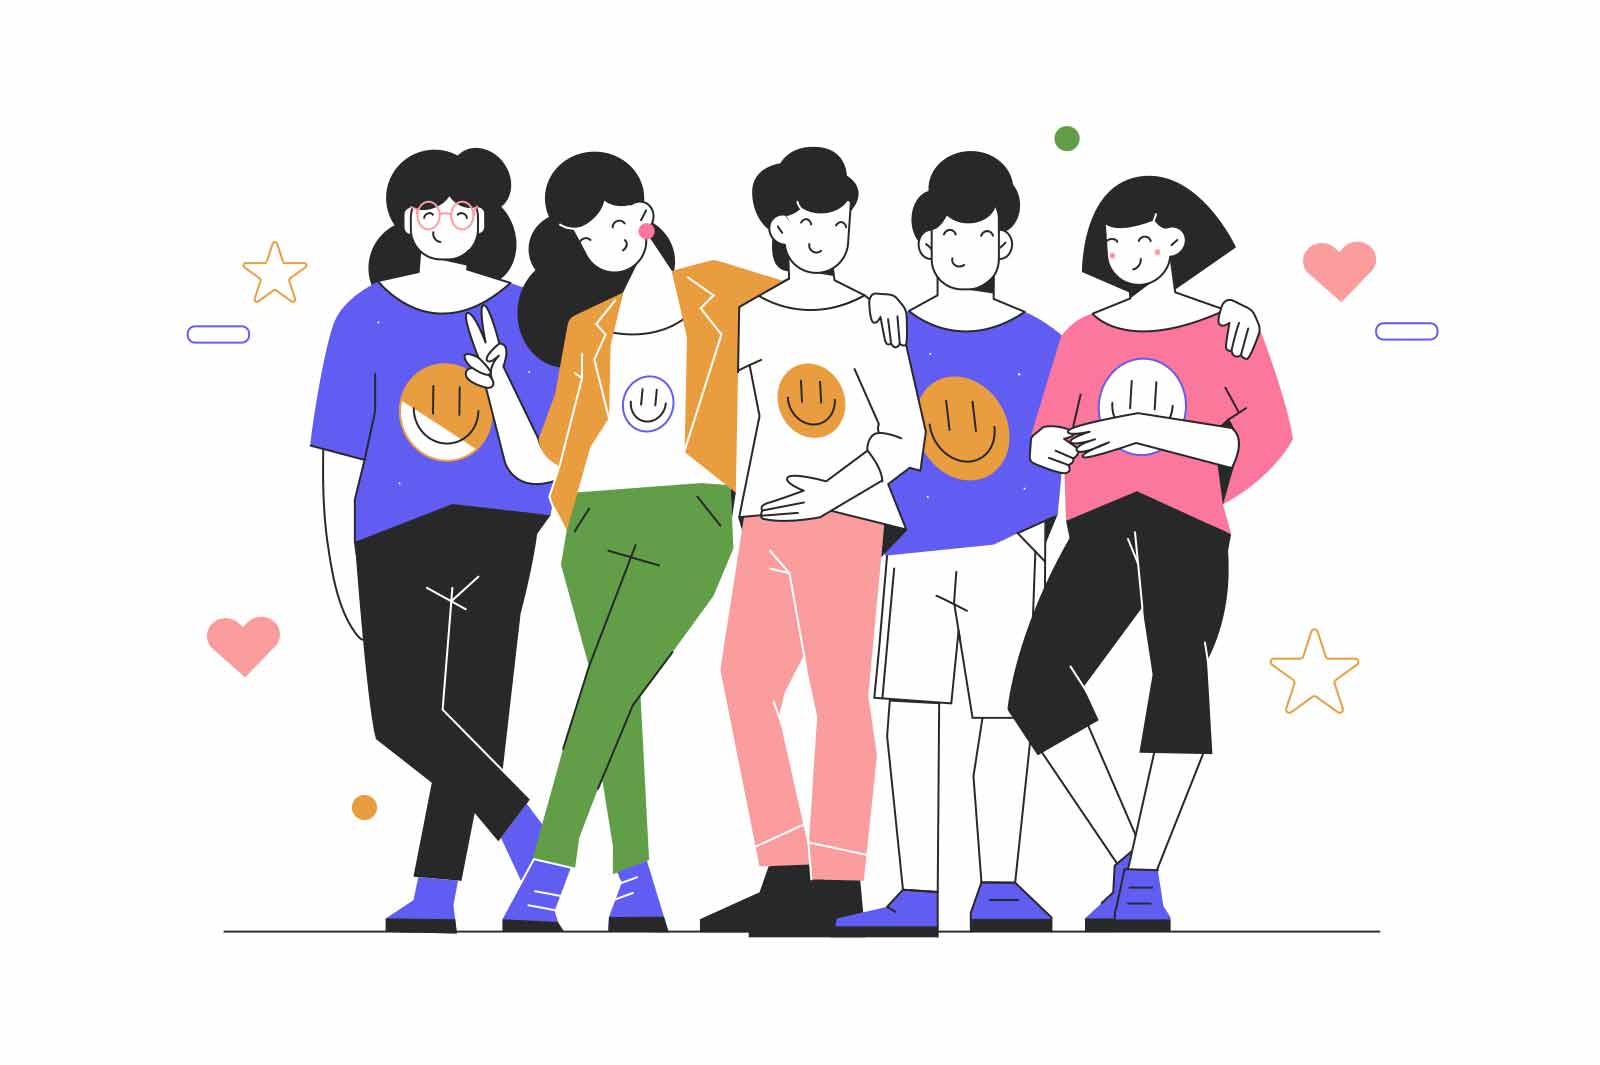 Team of friends or coworkers vector illustration. People standing, hugging and posing together. Teamwork, togetherness and friendship concept